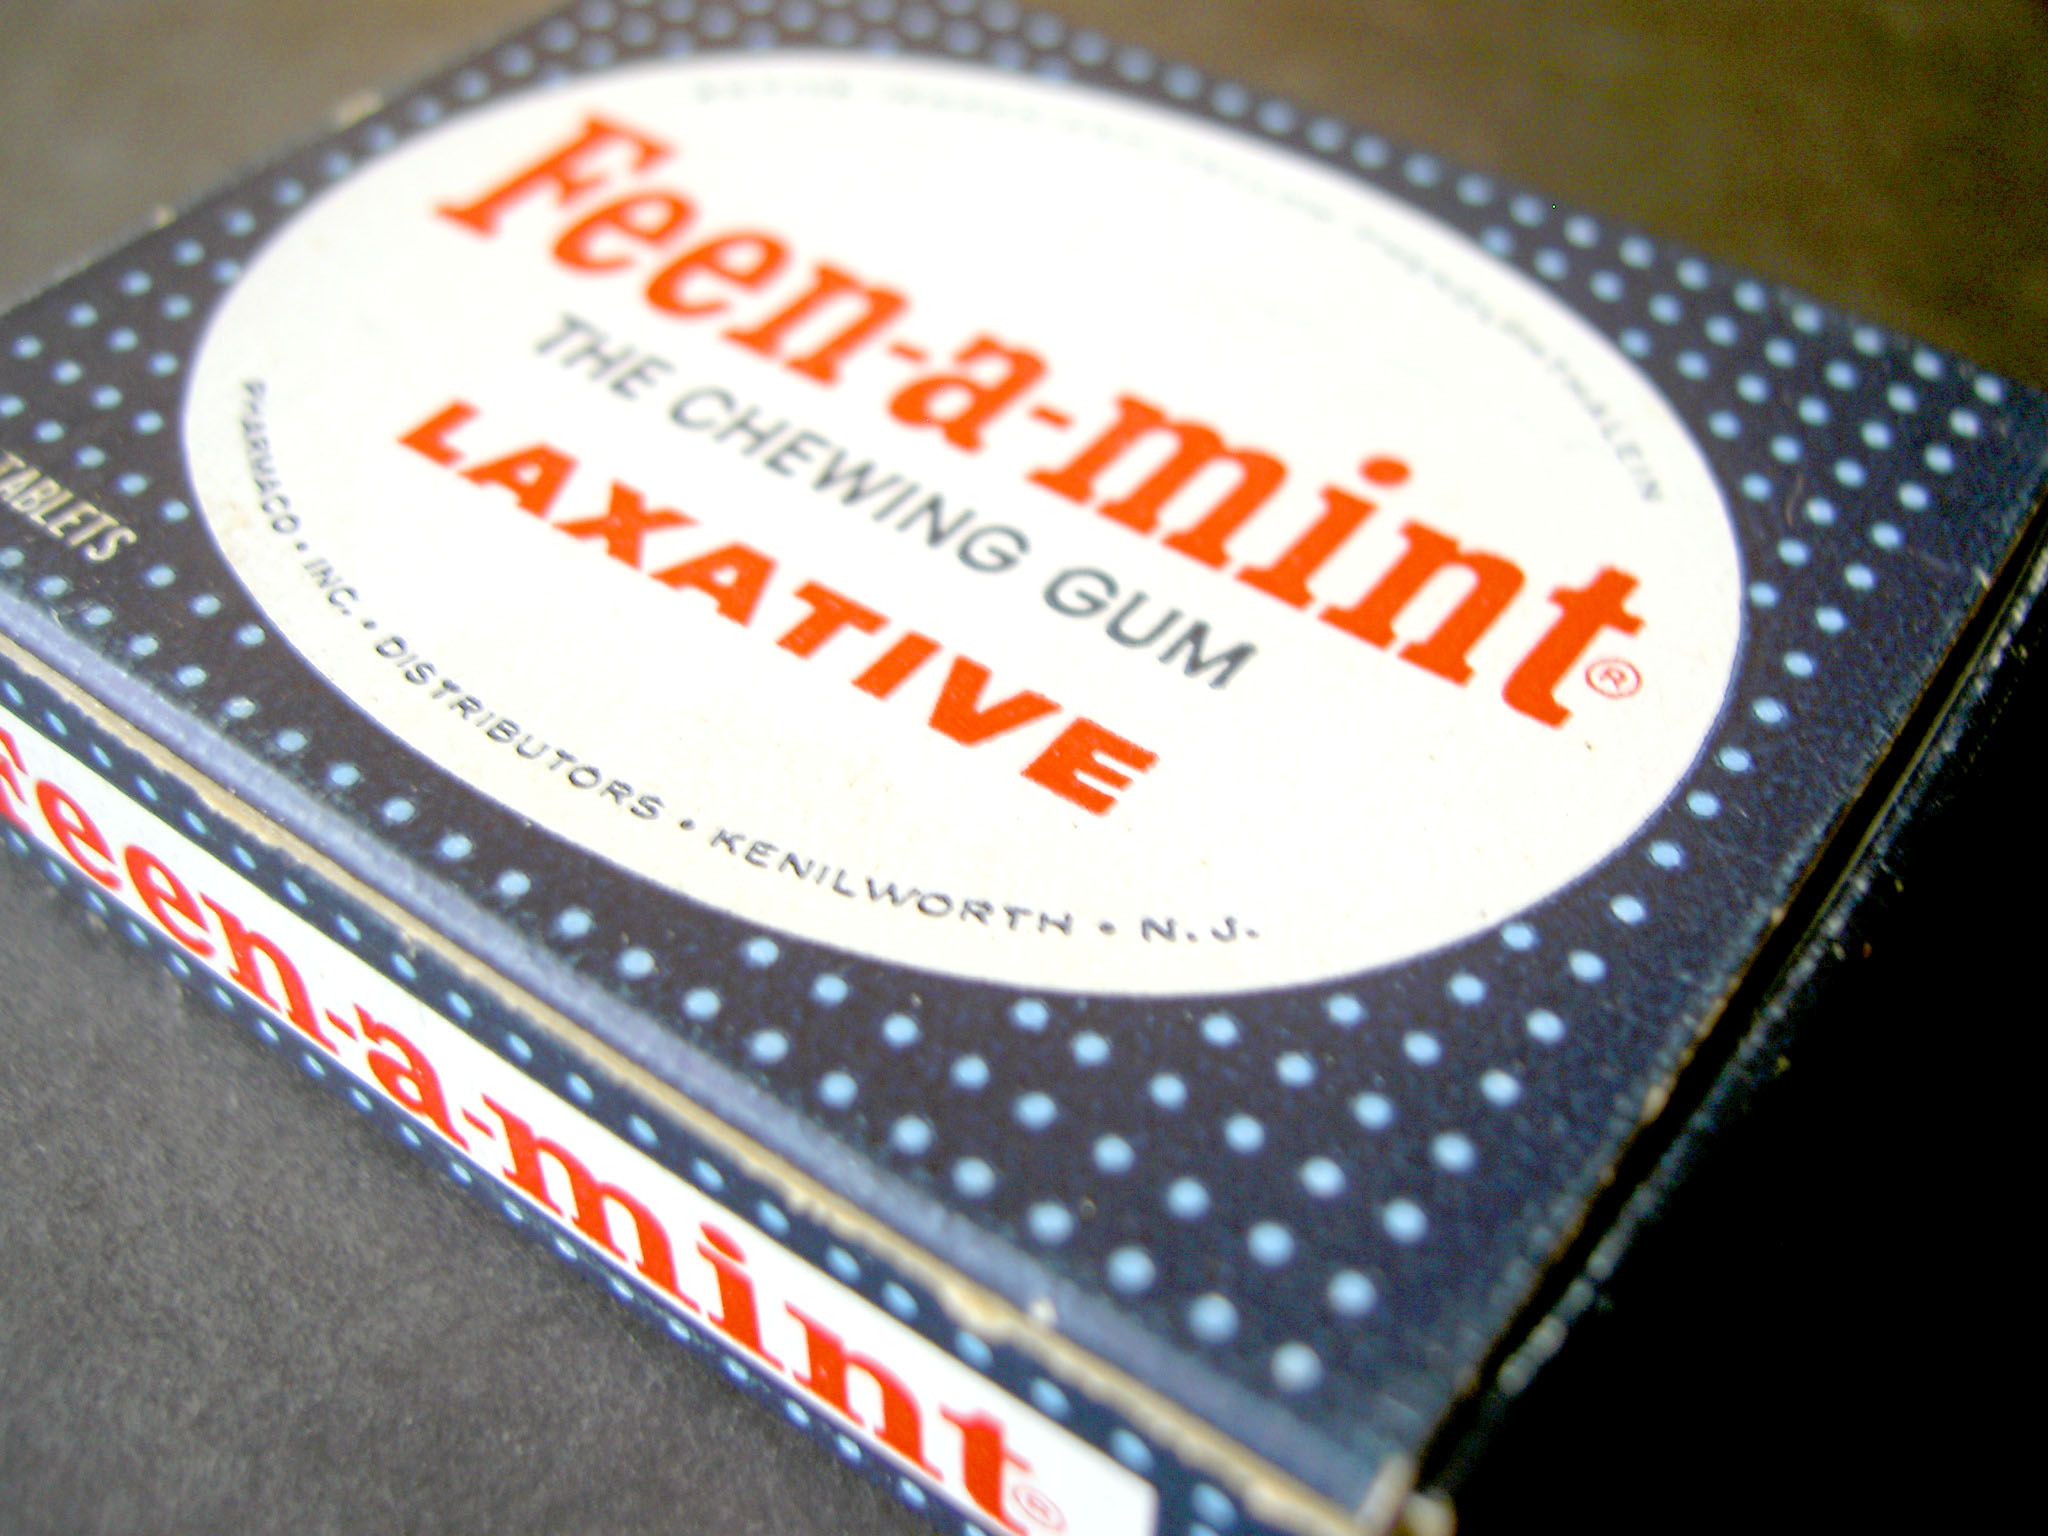 Feenamint: "It's modern, scientific, and tastes like your favorite chewing gum."